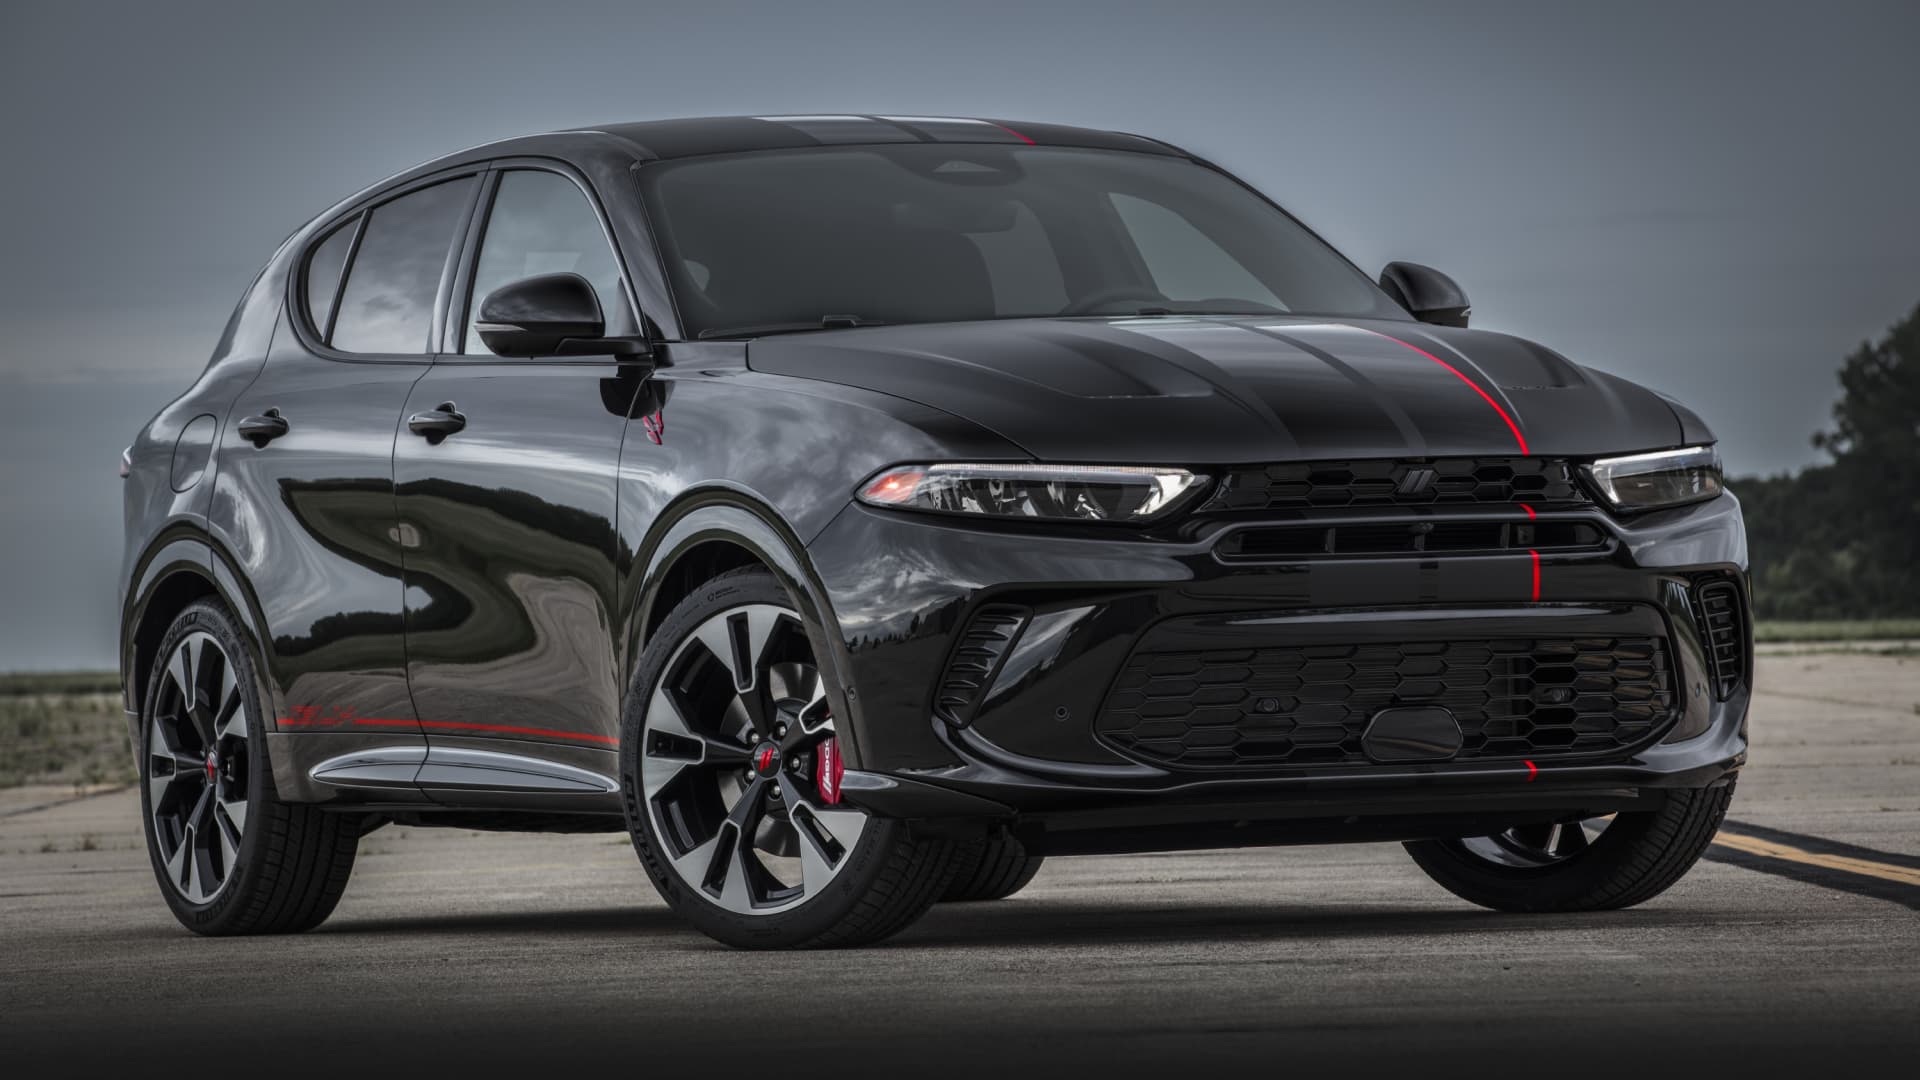 Dodge’s first electrified vehicle will be a new crossover called the Hornet